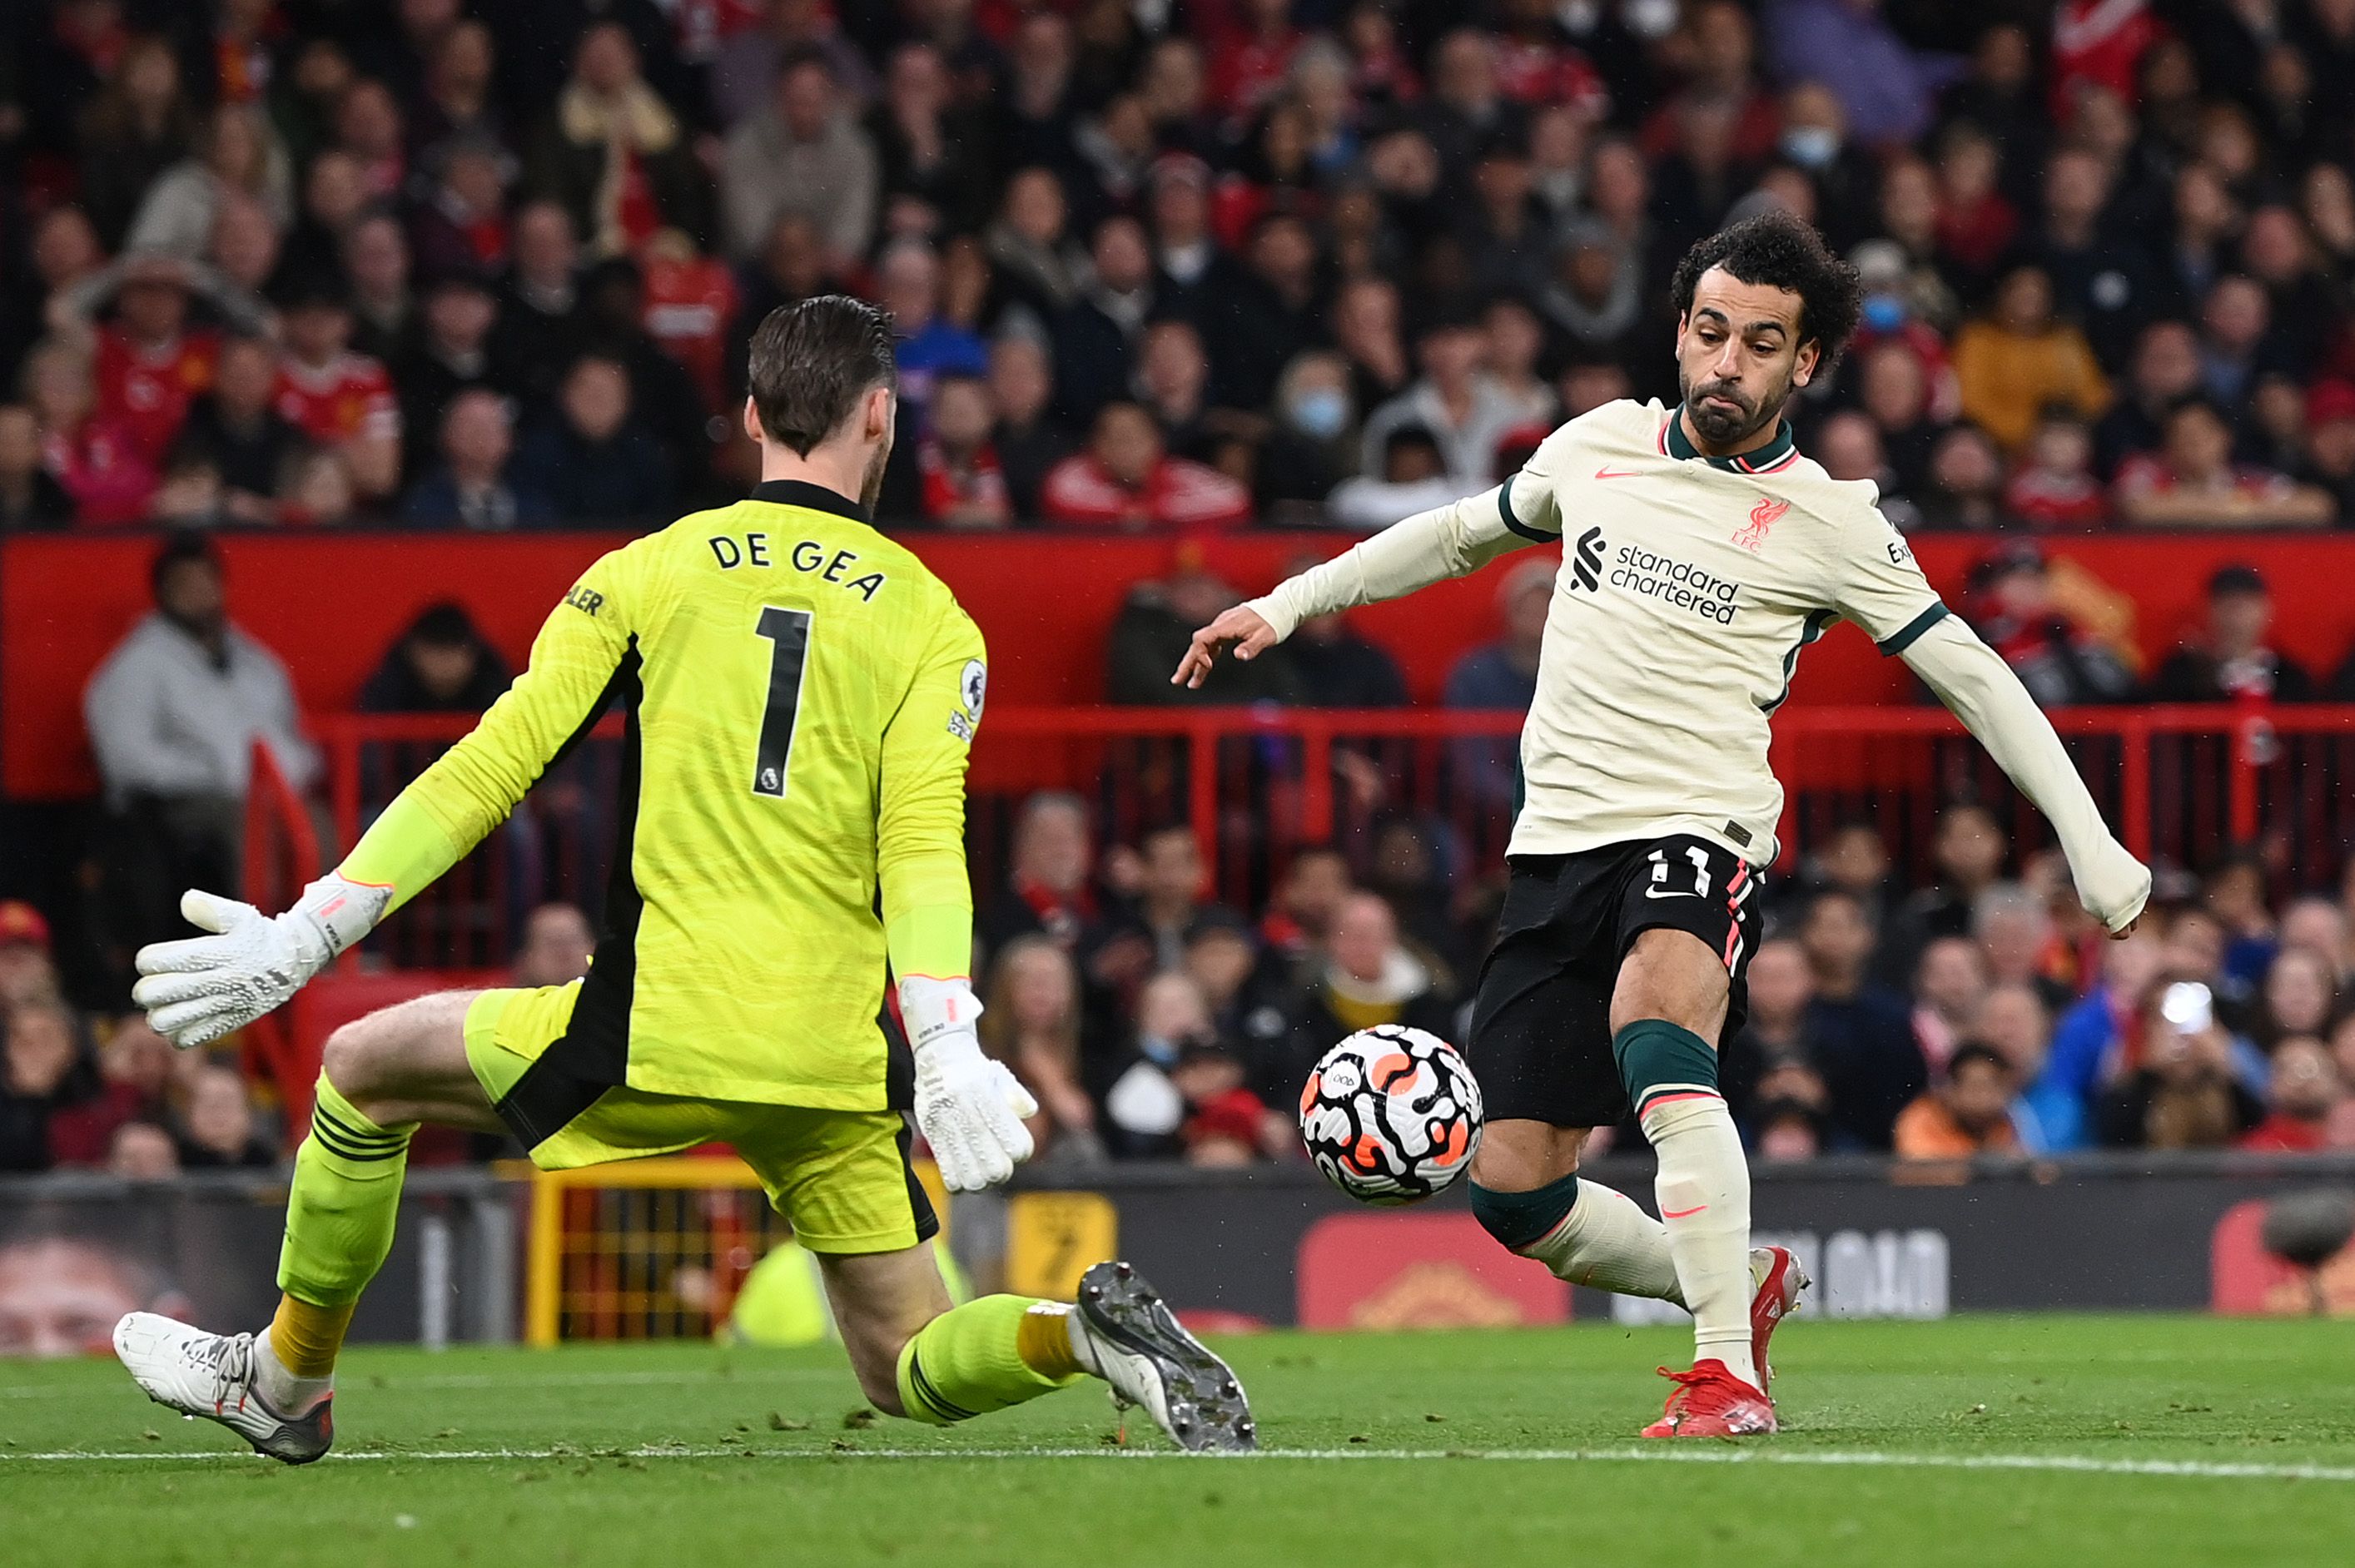 MANCHESTER, ENGLAND - OCTOBER 24: Mohamed Salah of Liverpool shoots past Manchester United goalkeeper David De Gea to score his hat trick during the Premier League match between Manchester United and Liverpool at Old Trafford on October 24, 2021 in Manchester, England. (Photo by Shaun Botterill/Getty Images)